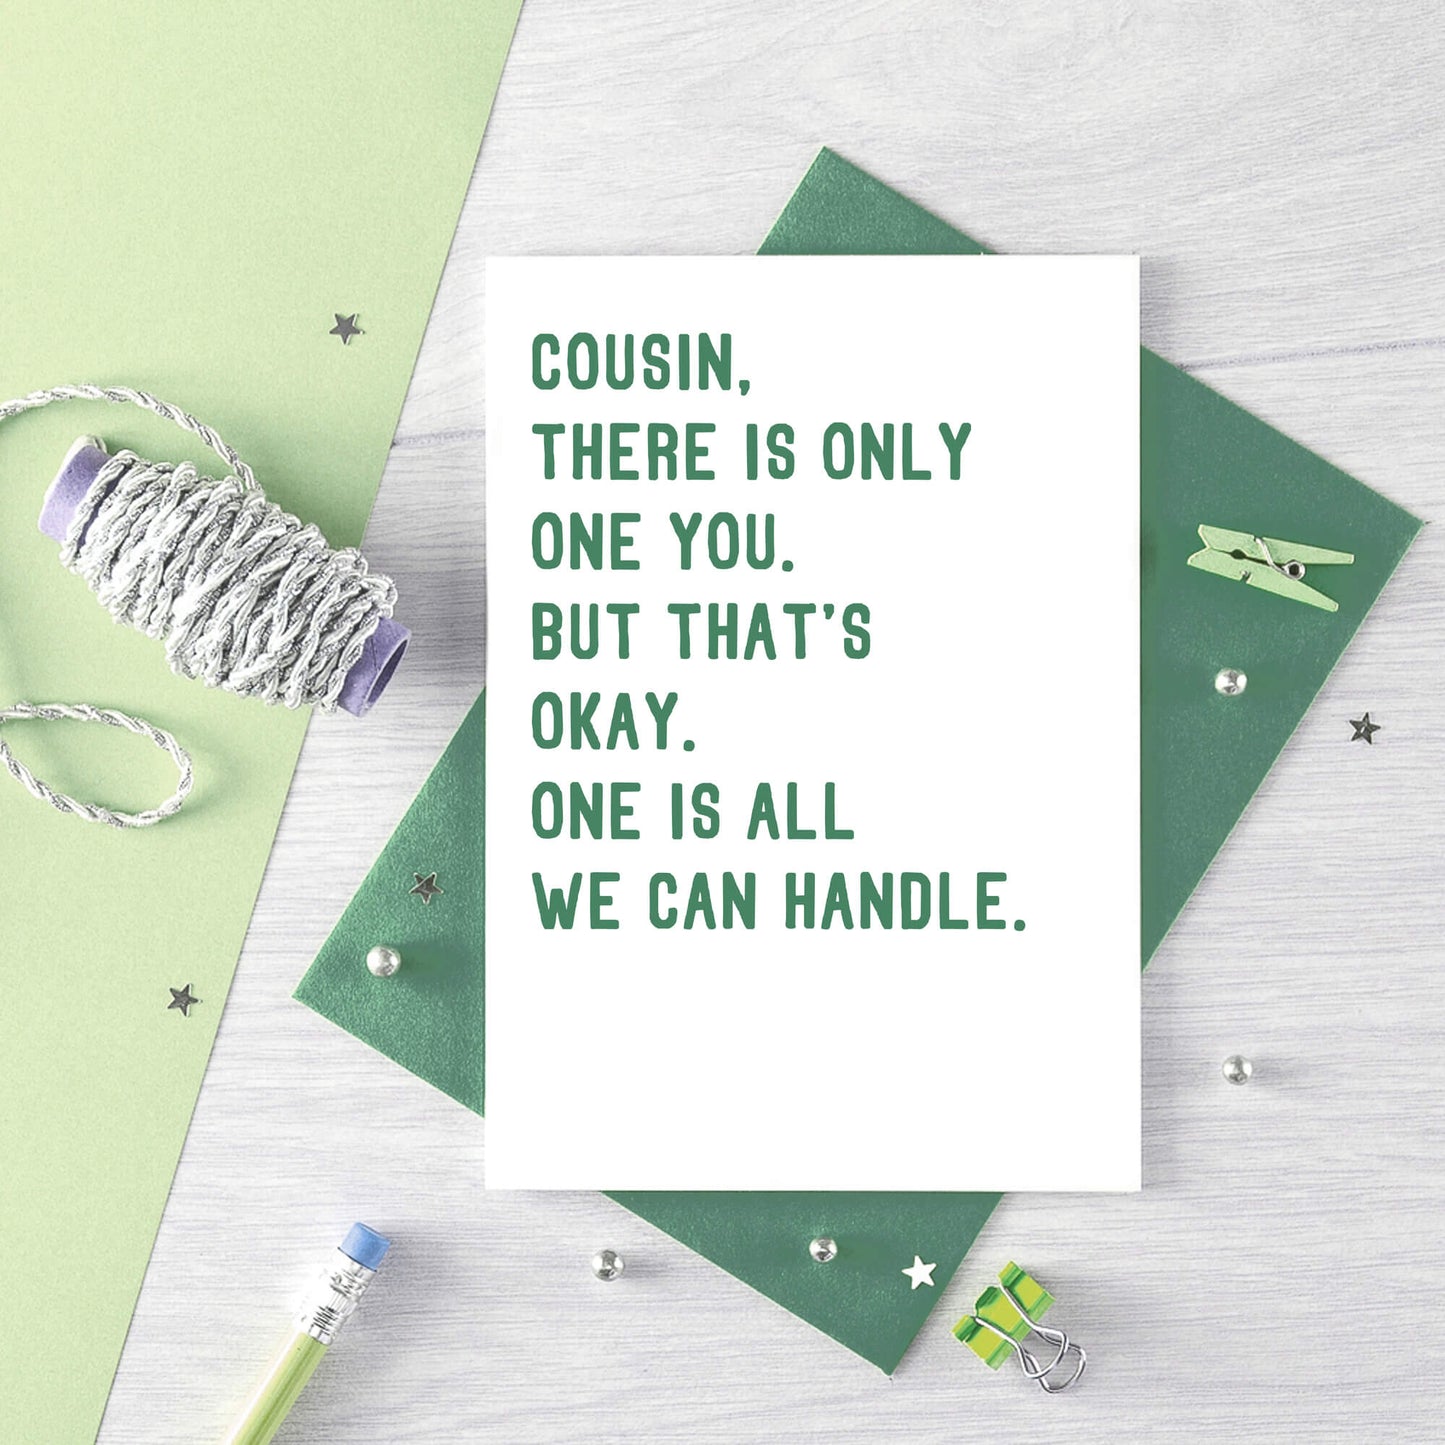 Cousin Card by SixElevenCreations. Reads Cousin, there is only one you. But that's okay. One is all we can handle. Product Code SE2045A6